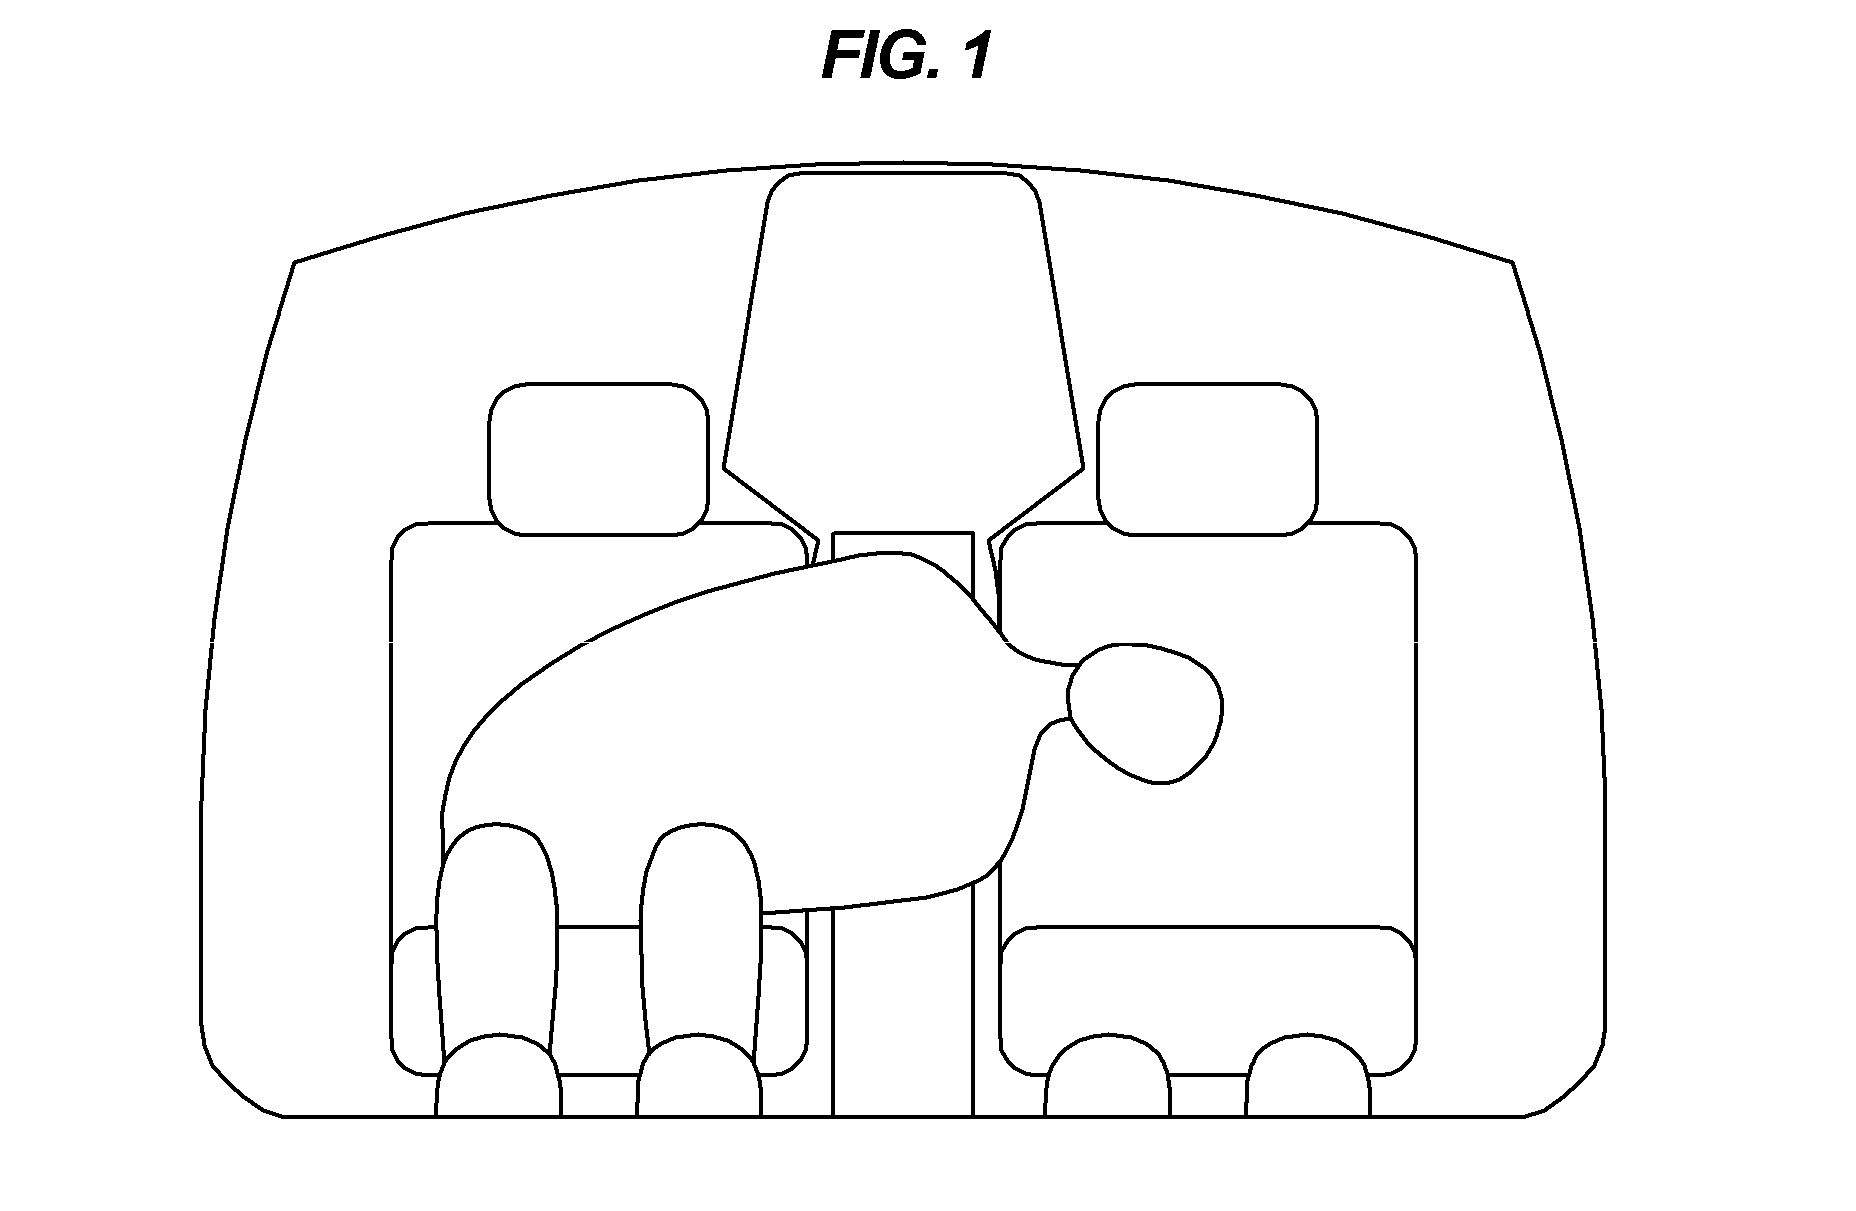 Center airbag module for vehicle